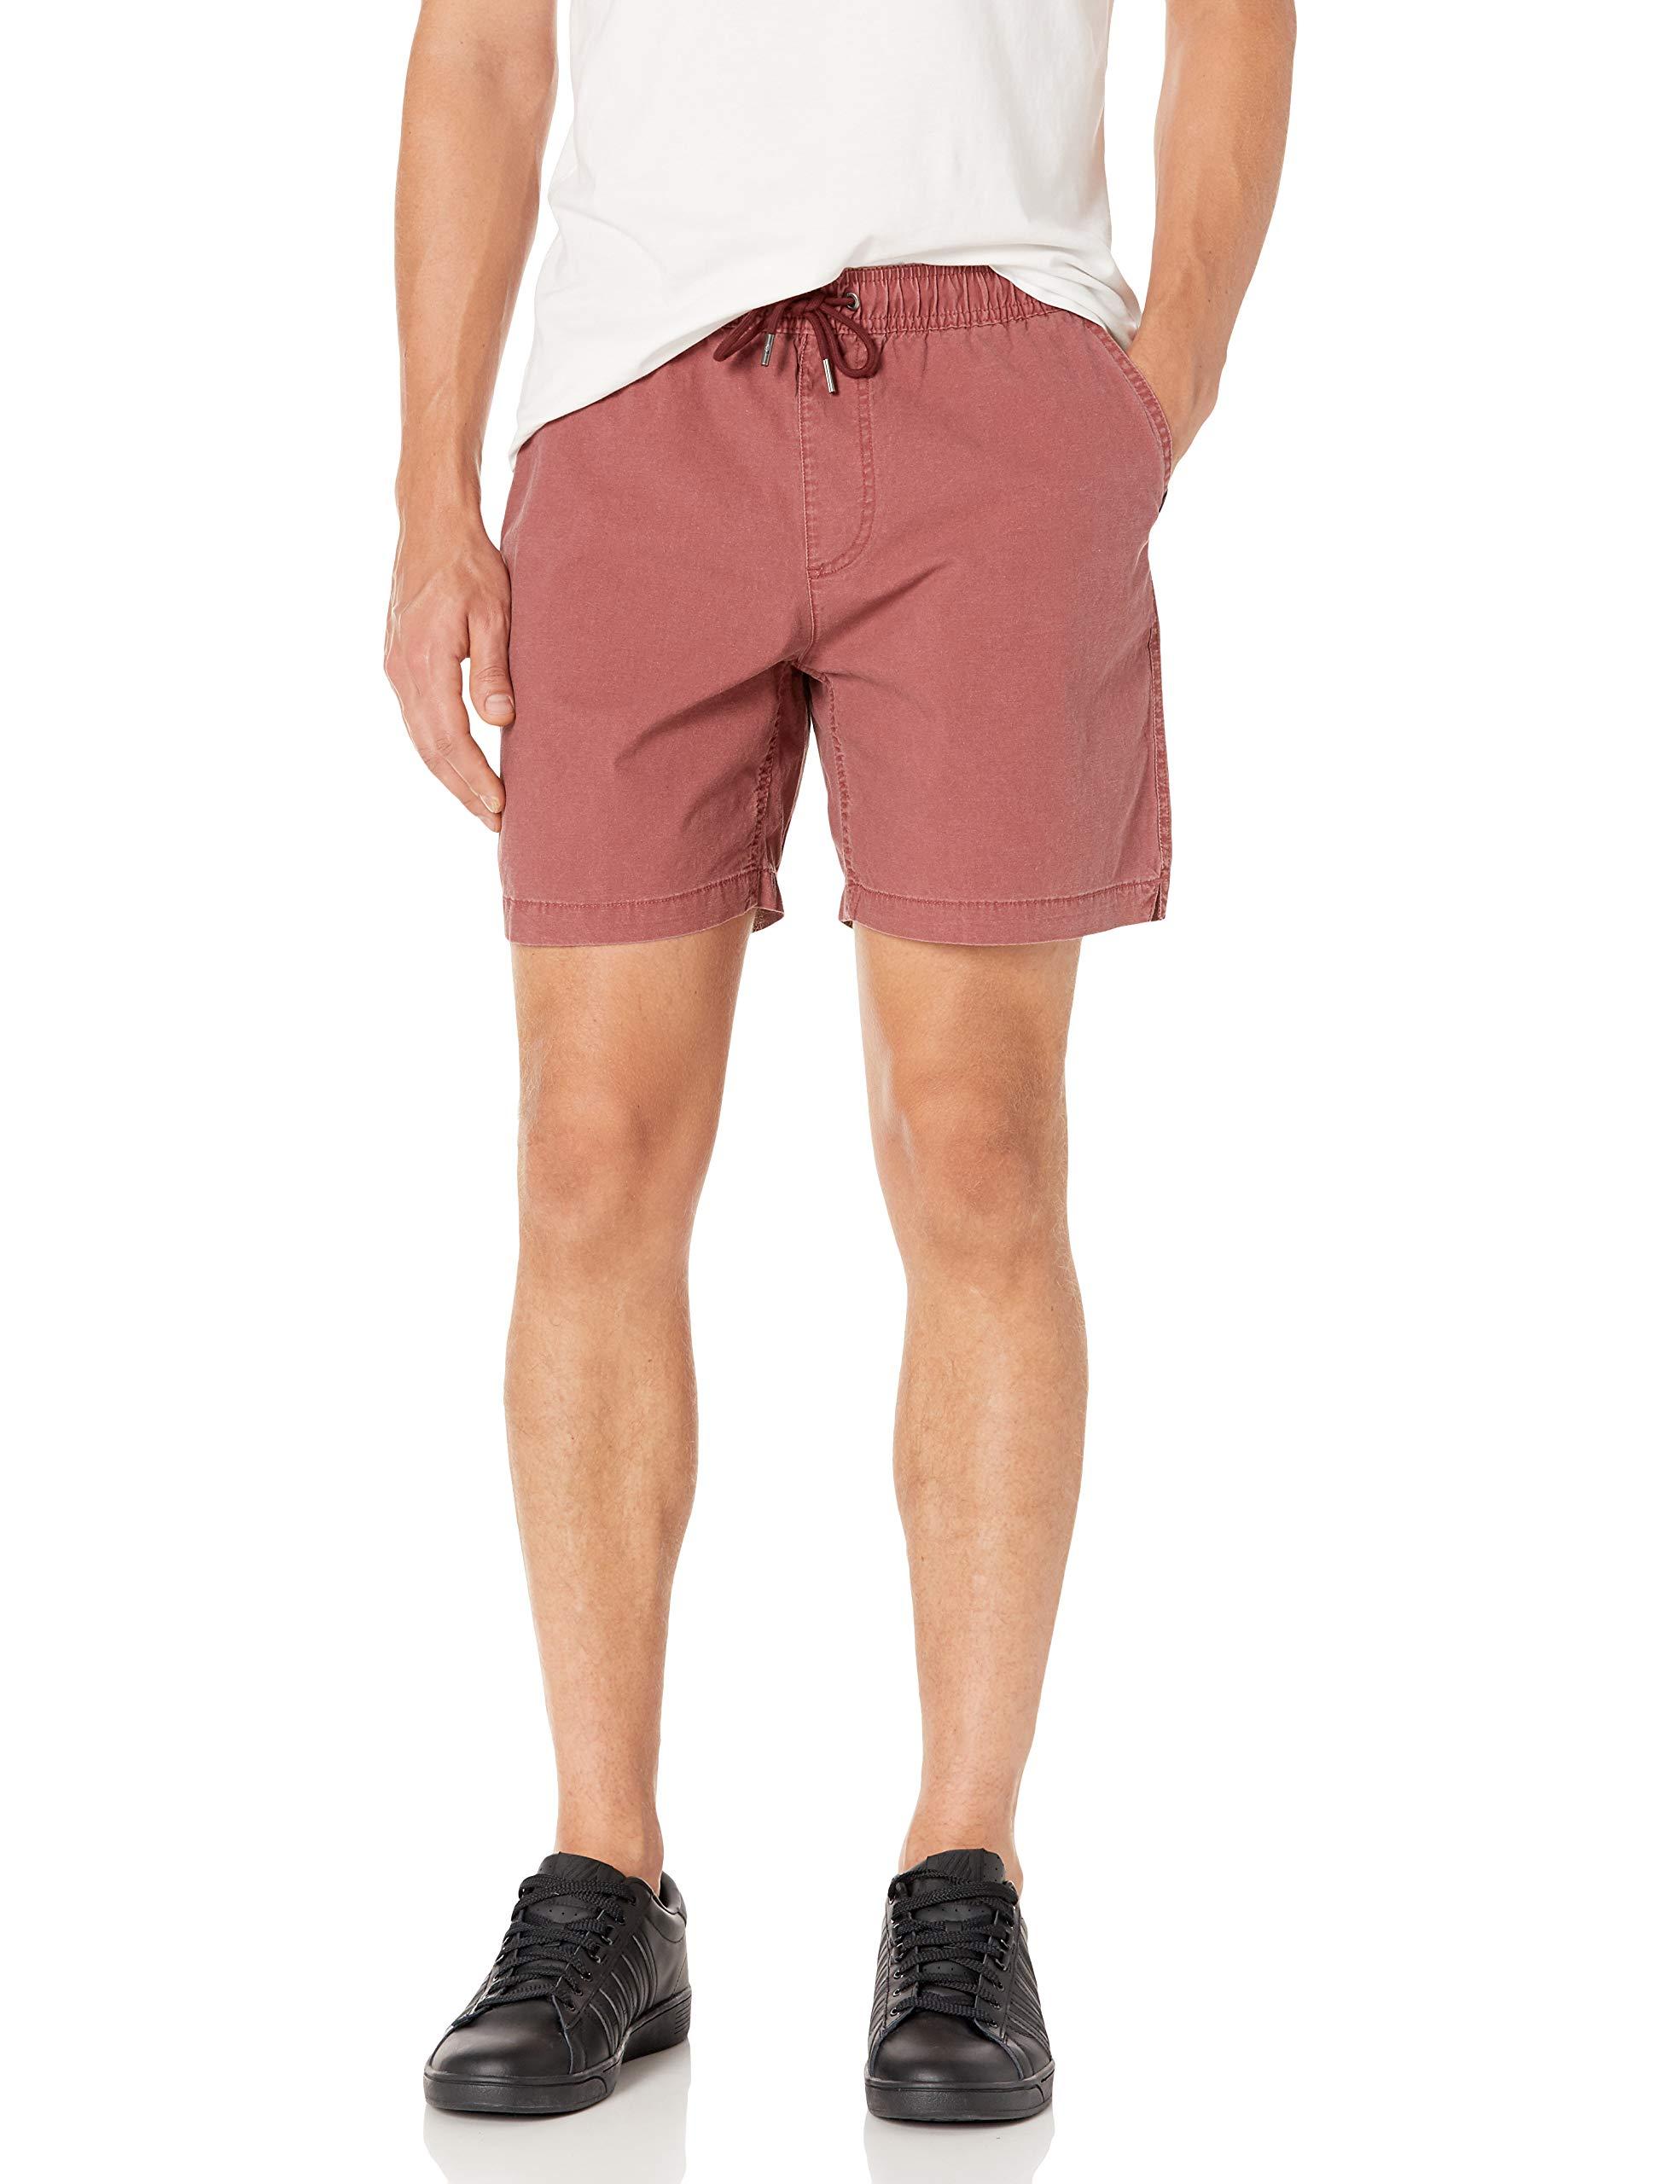 Quiksilver Cotton Taxer Walk Short in Red for Men - Lyst
 Quiksilver Shorts Red